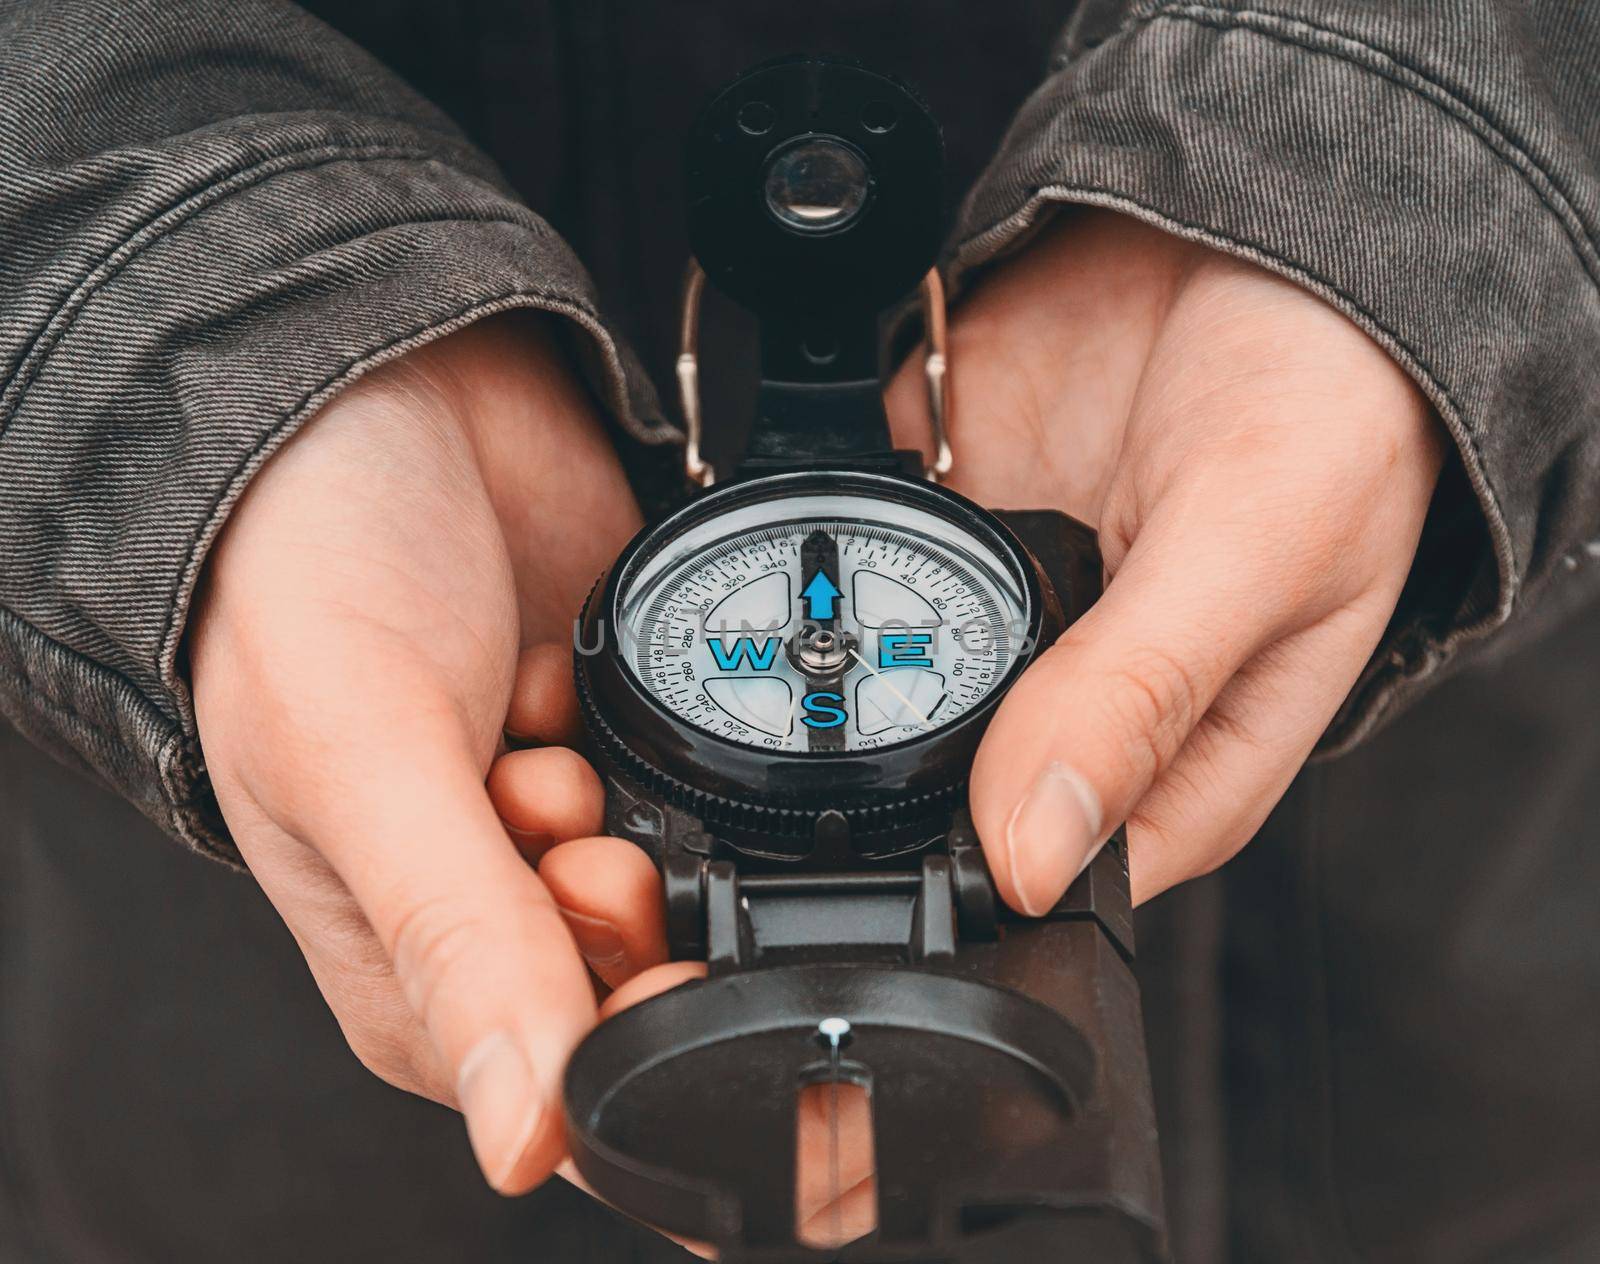 Hiker woman holding a compass on nature. Close-up image